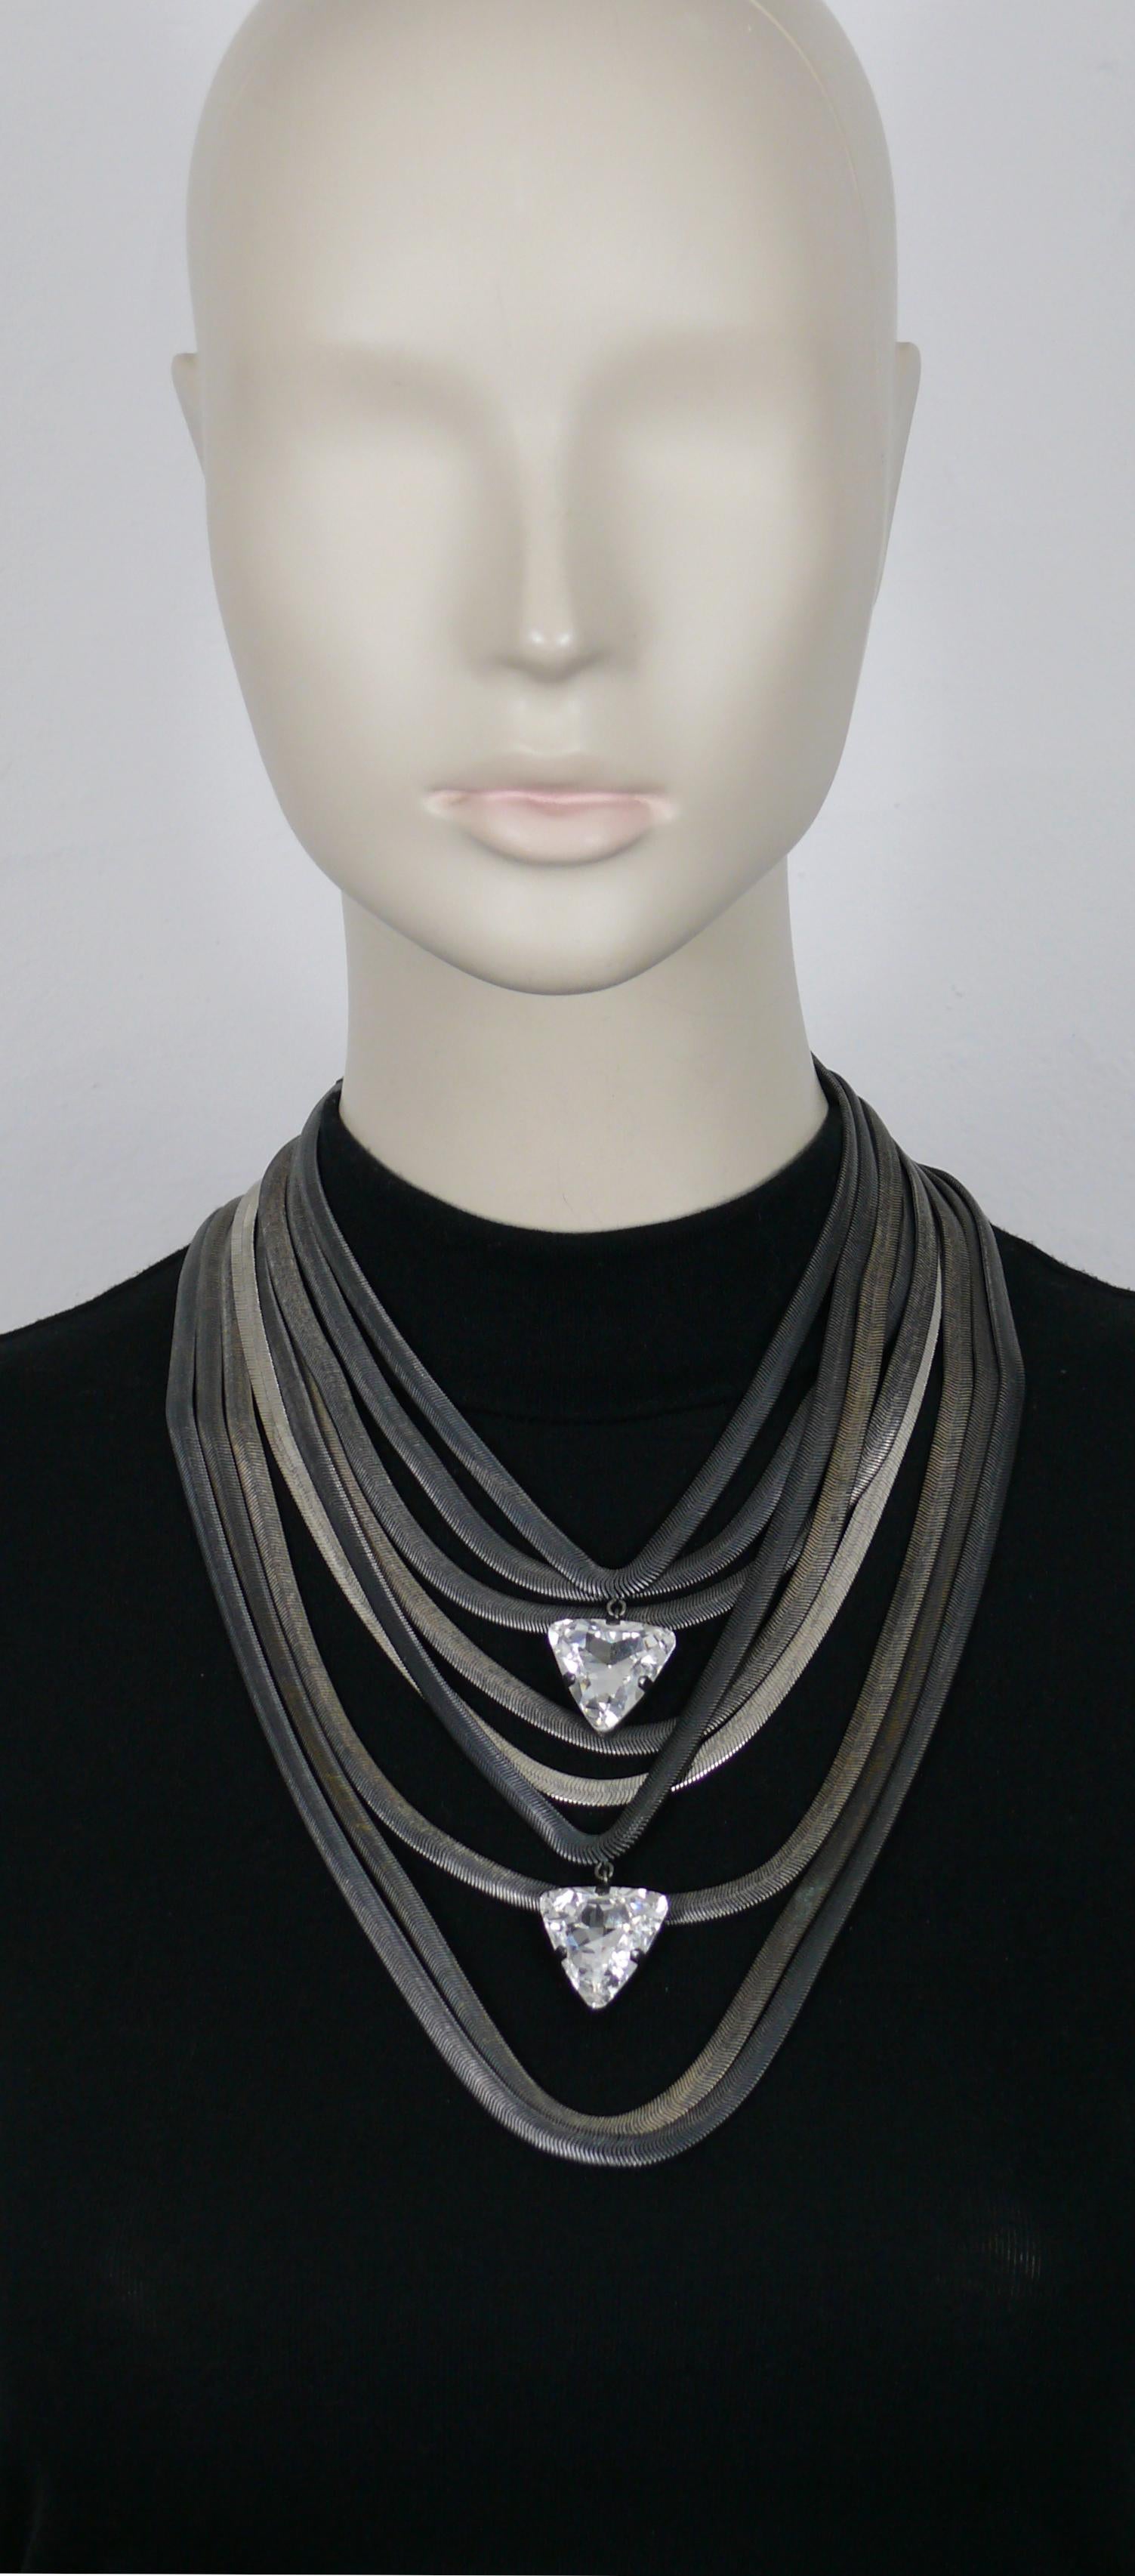 YVES SAINT LAURENT Rive Gauche vintage multi-strand oxidized (gun patina) silver tone snake chains necklace featuring two large rectangular clear crystals.

S hook closure.

Embossed YVES SAINT LAURENT RIVE GAUCHE.
Made in France.

Indicative